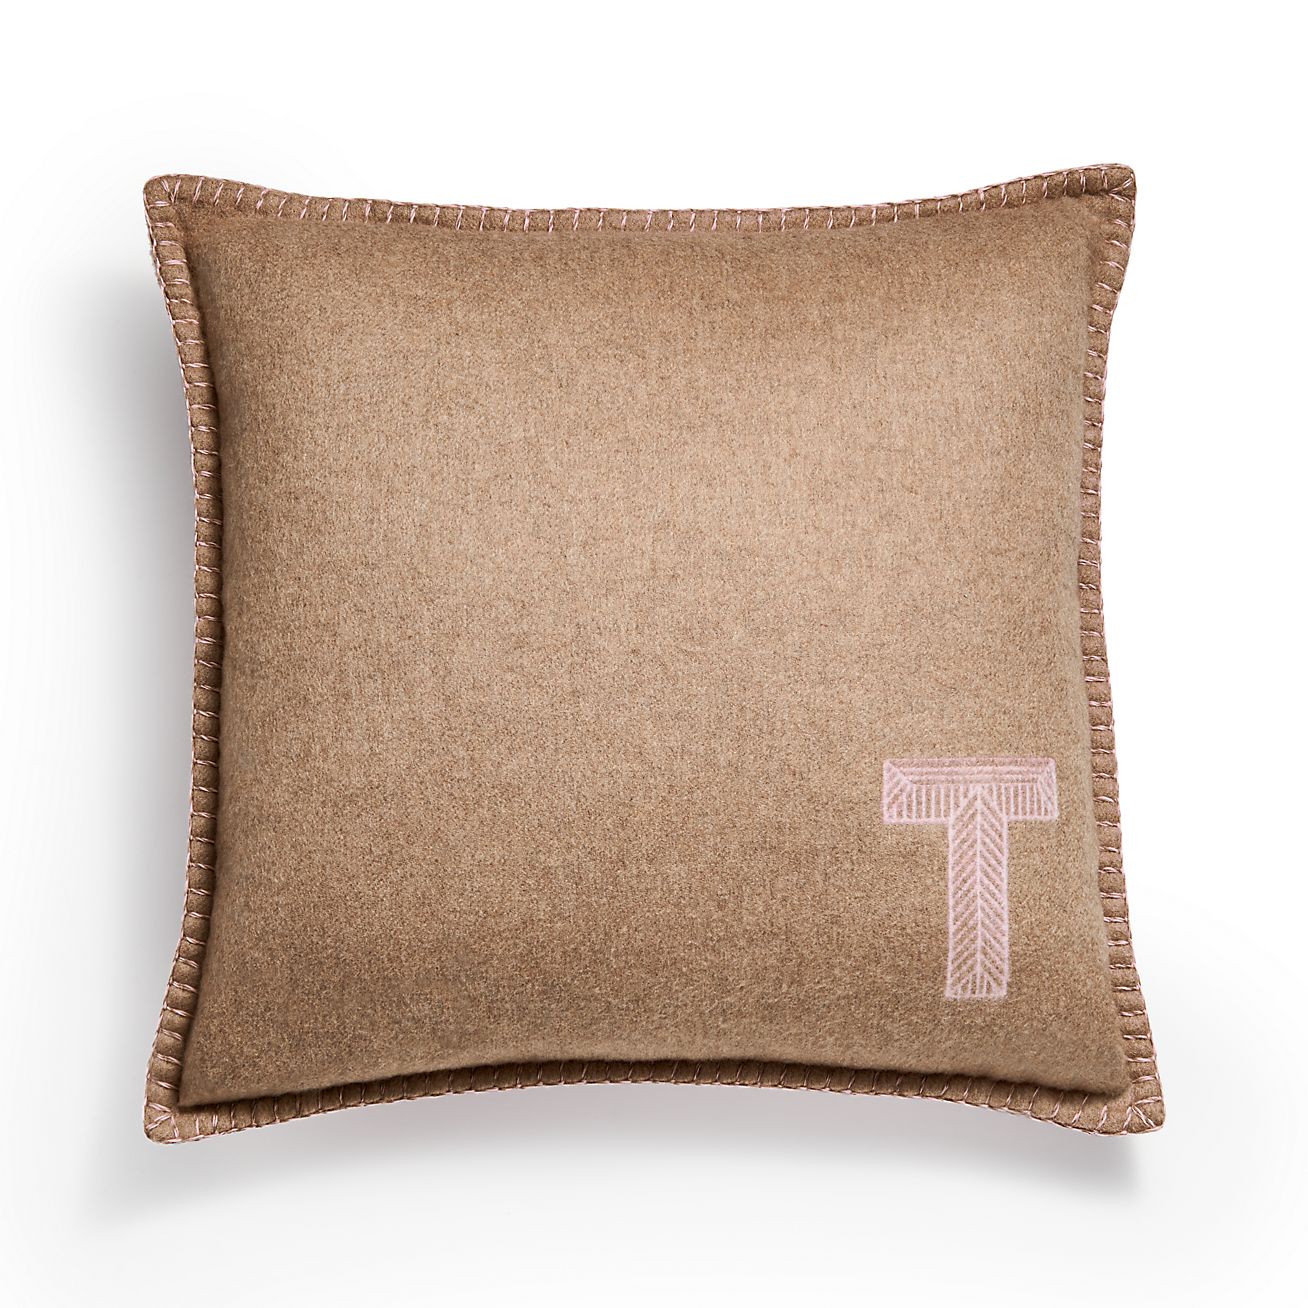 Color Block Cushion in Emerald Green and Morganite Pink Cashmere and Wool